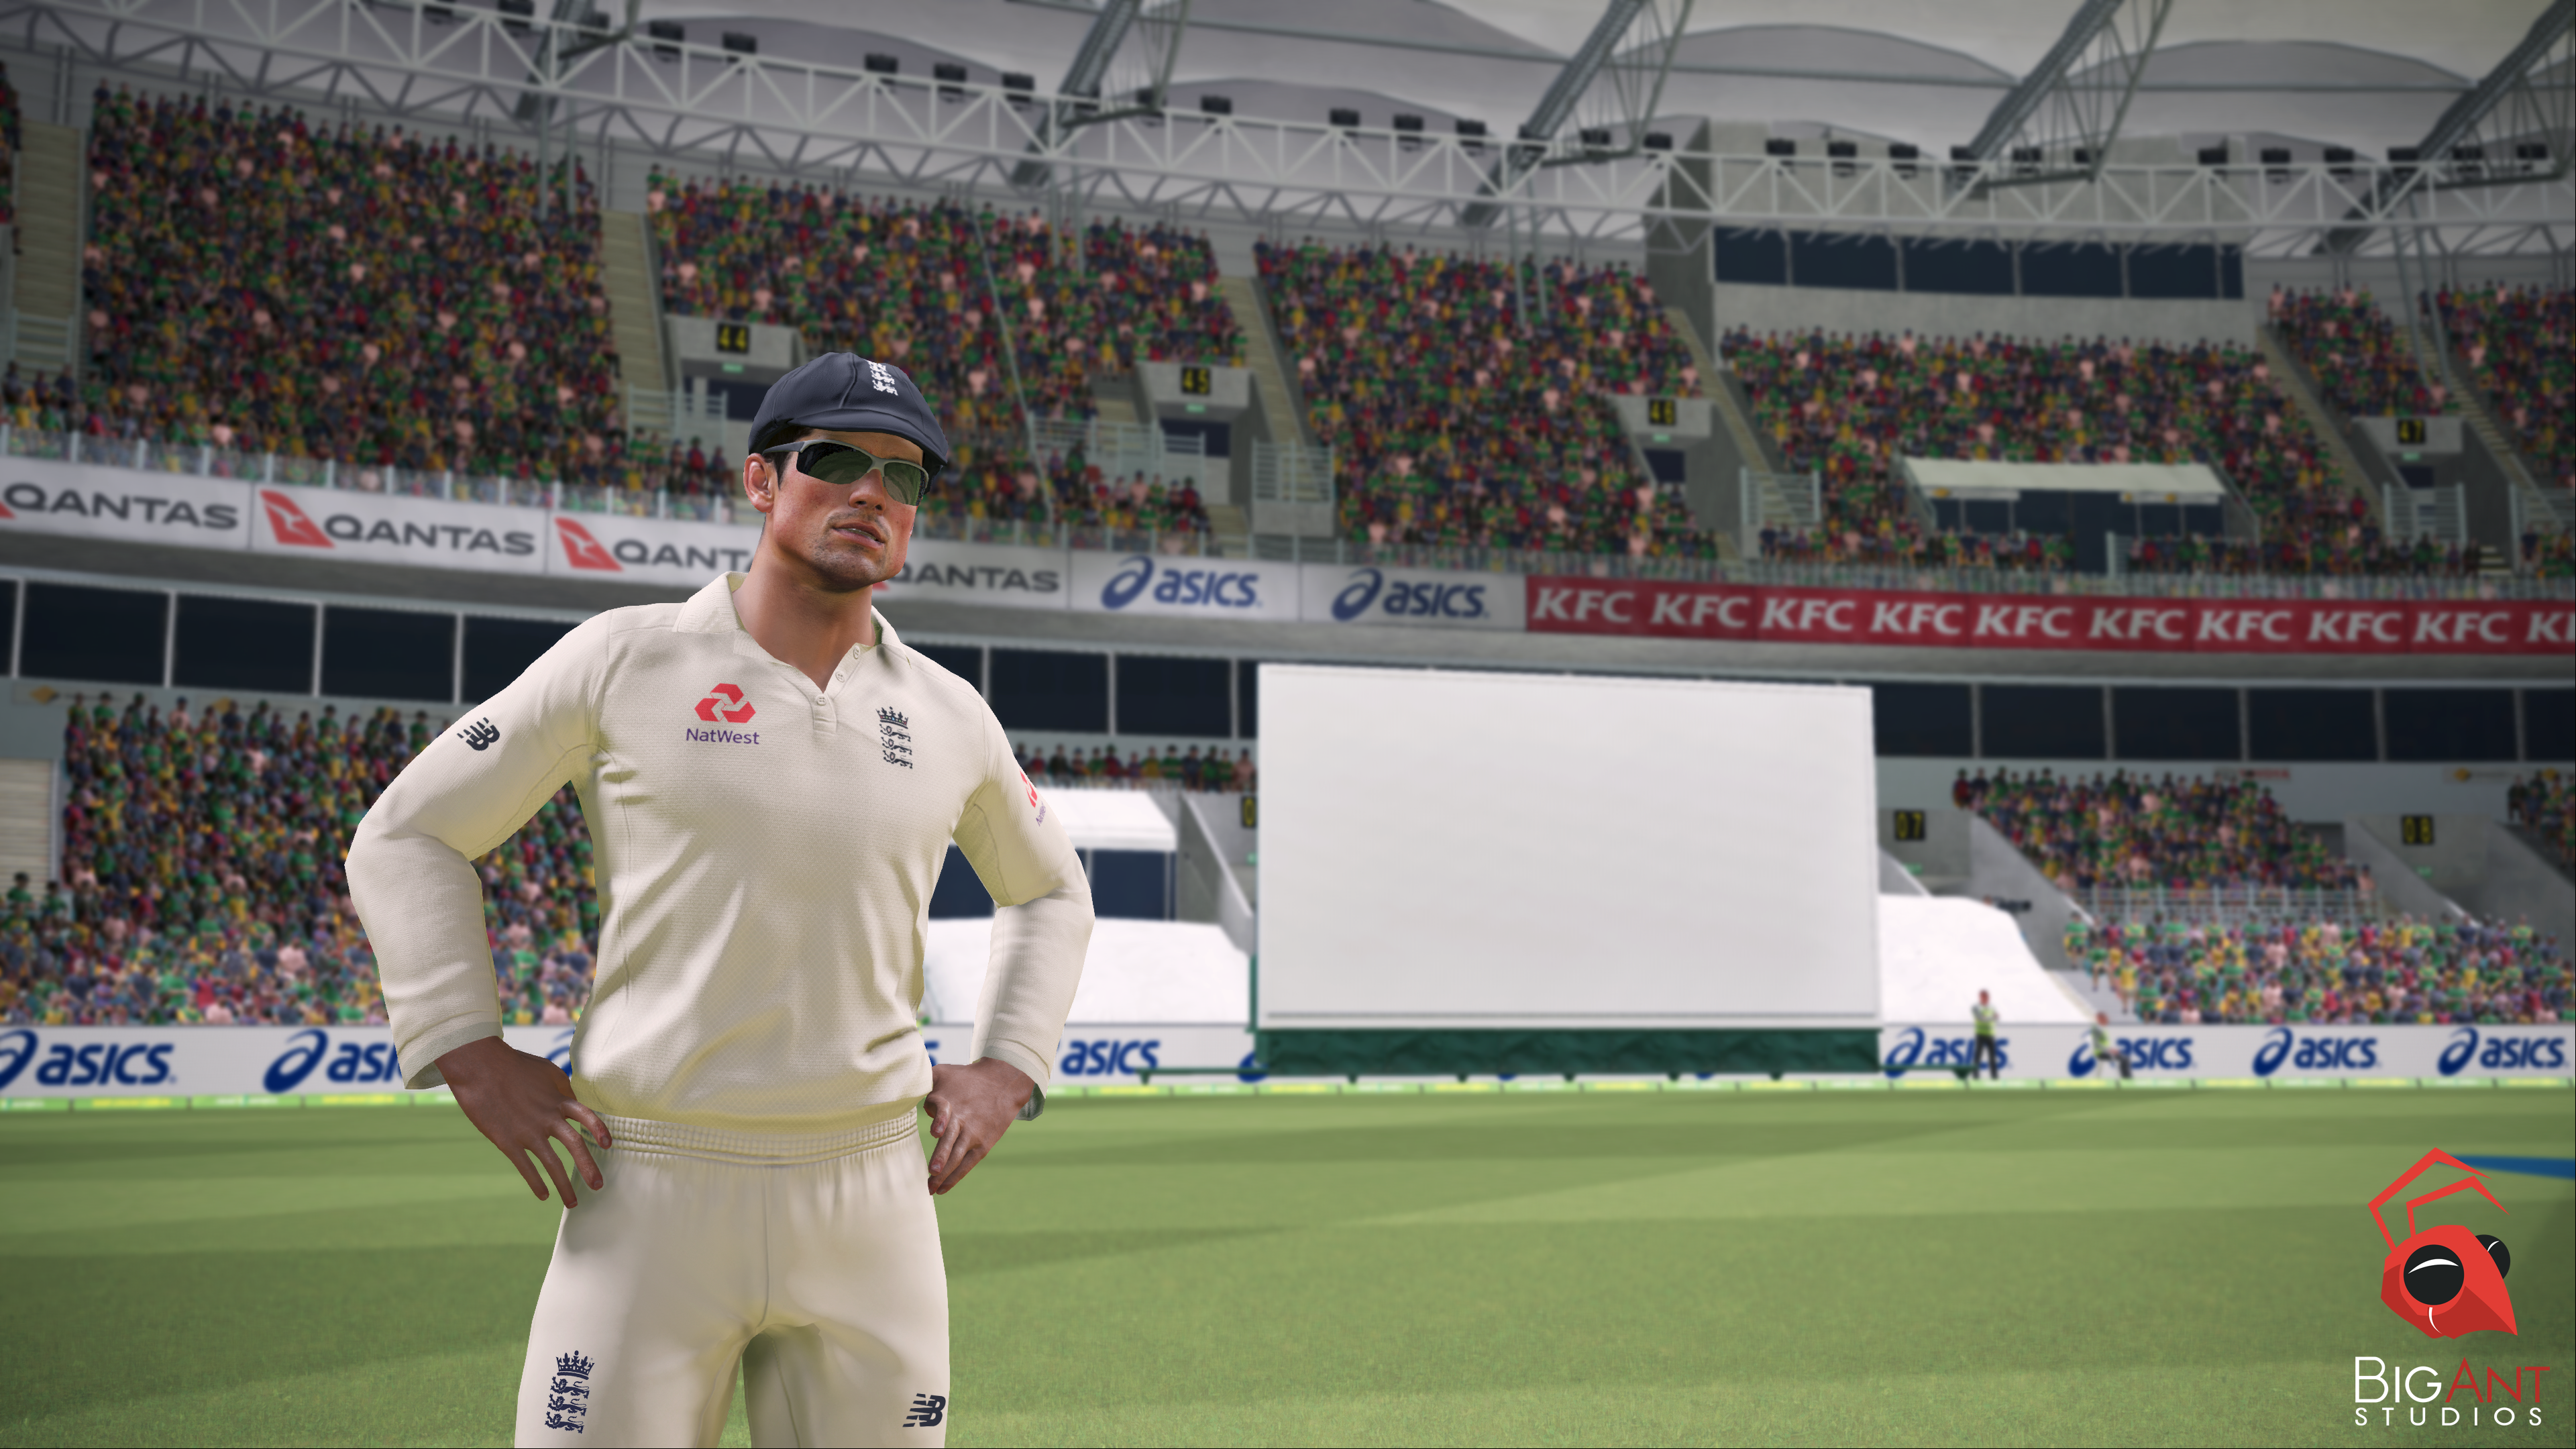 Ashes Cricket Review 2017 image 3